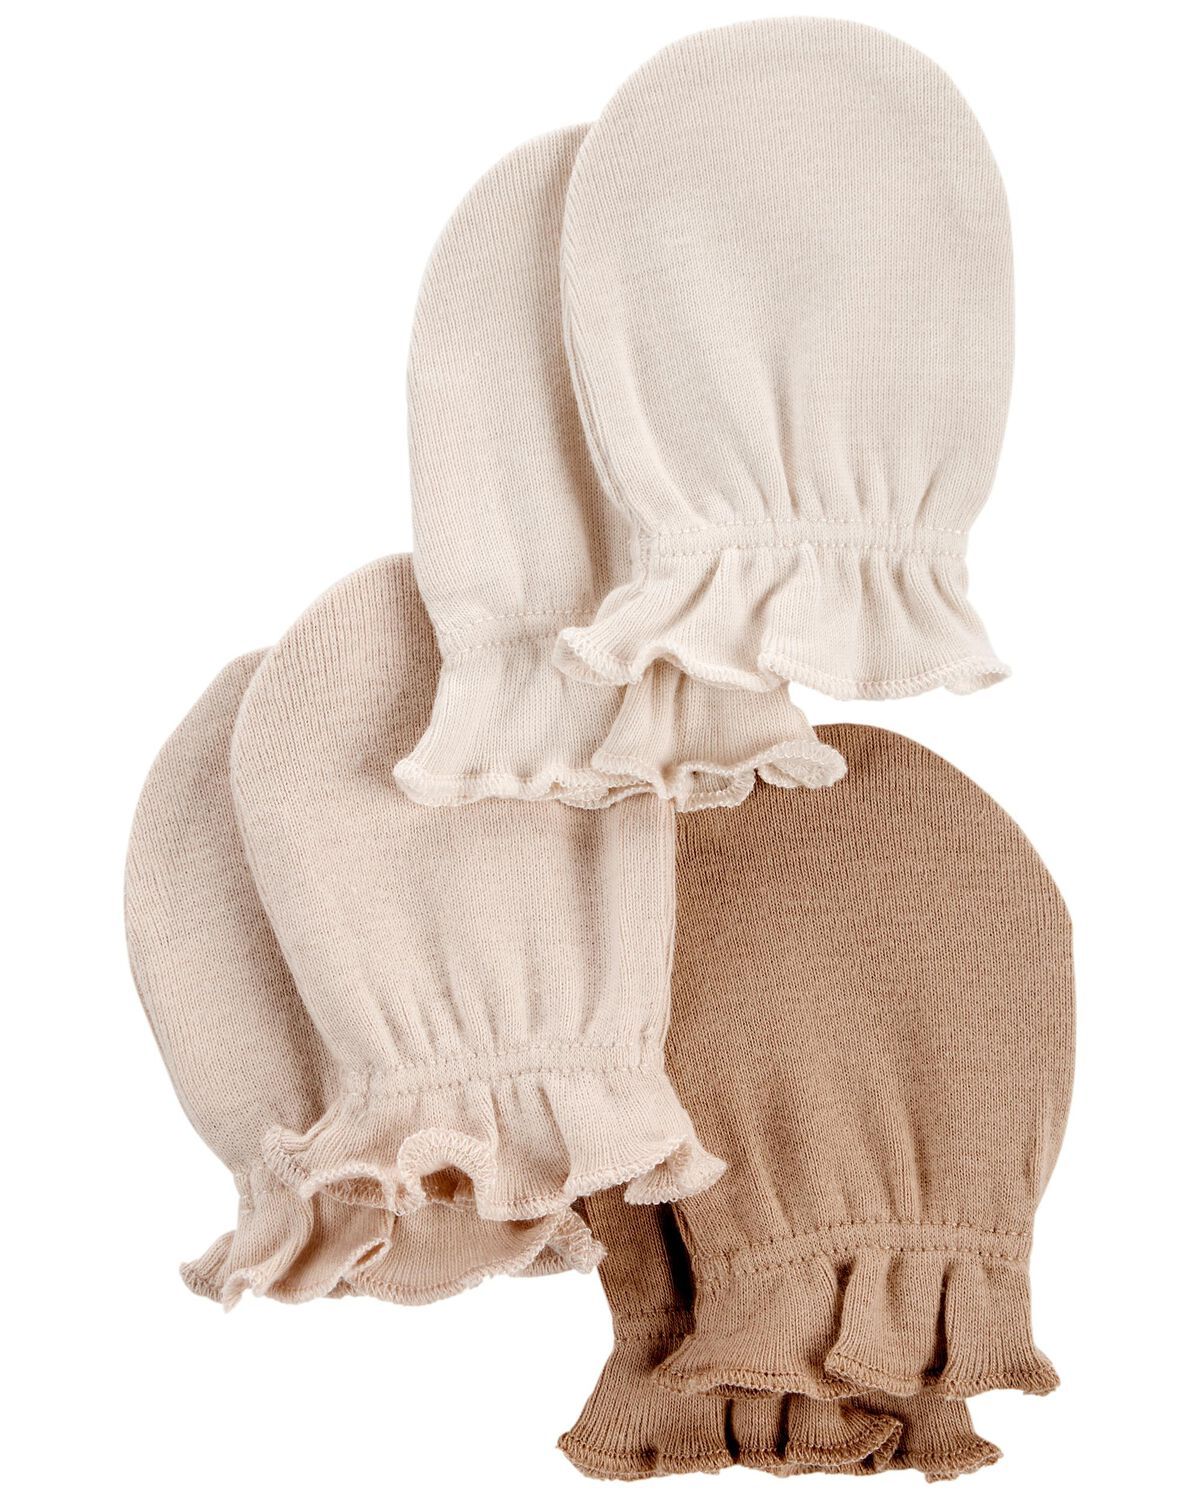 Khaki/Ivory Baby 3-Pack Mittens | carters.com | Carter's